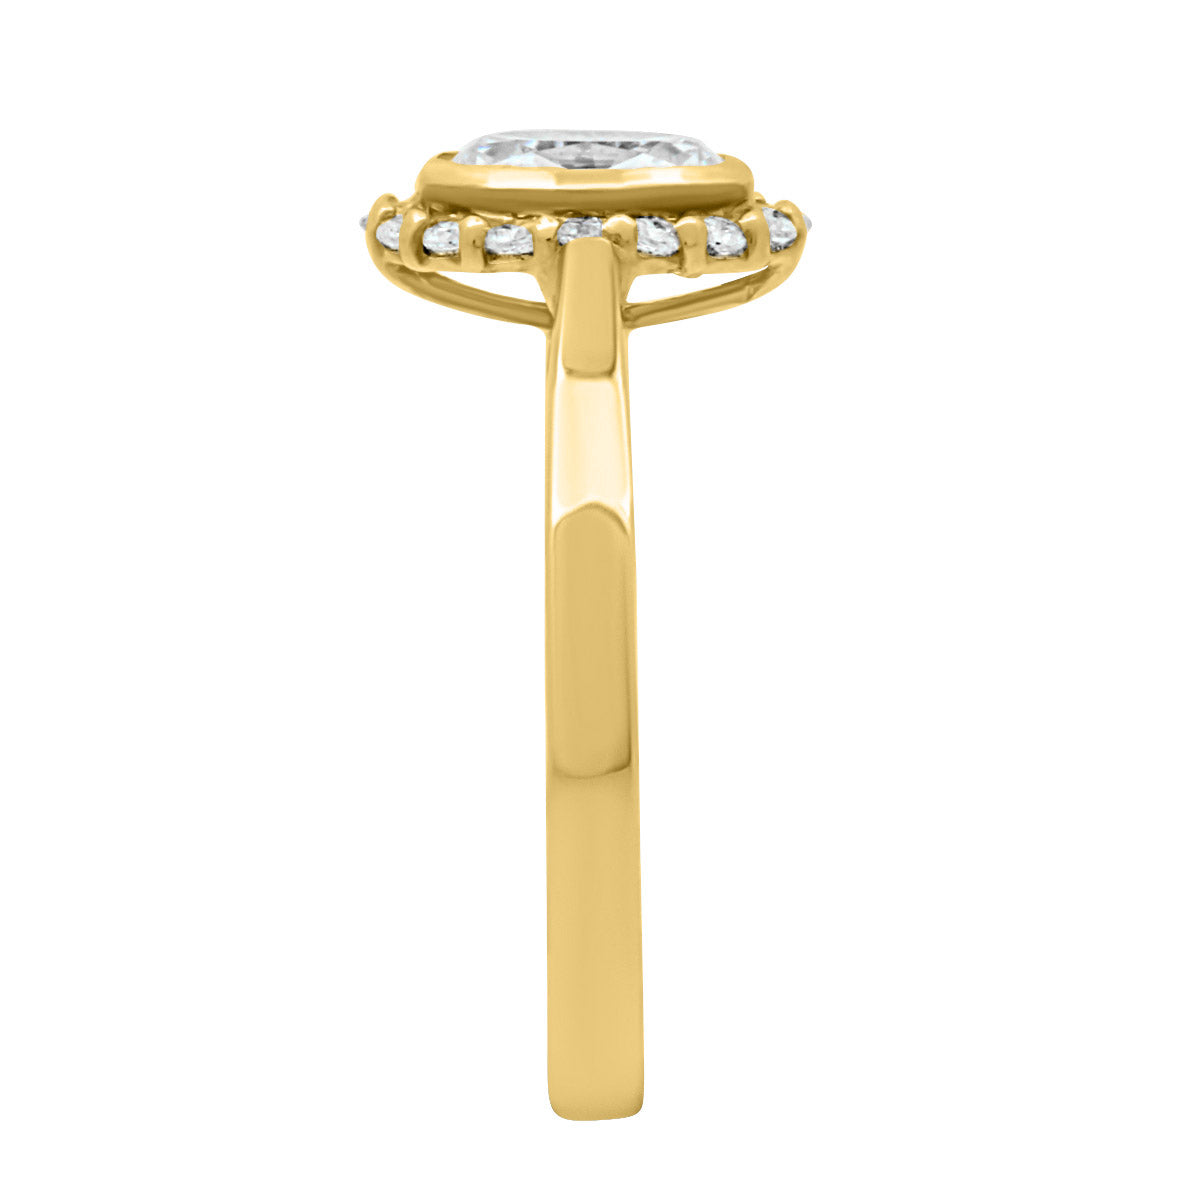  Oval Halo Diamond Ring in yellow gold from an end view